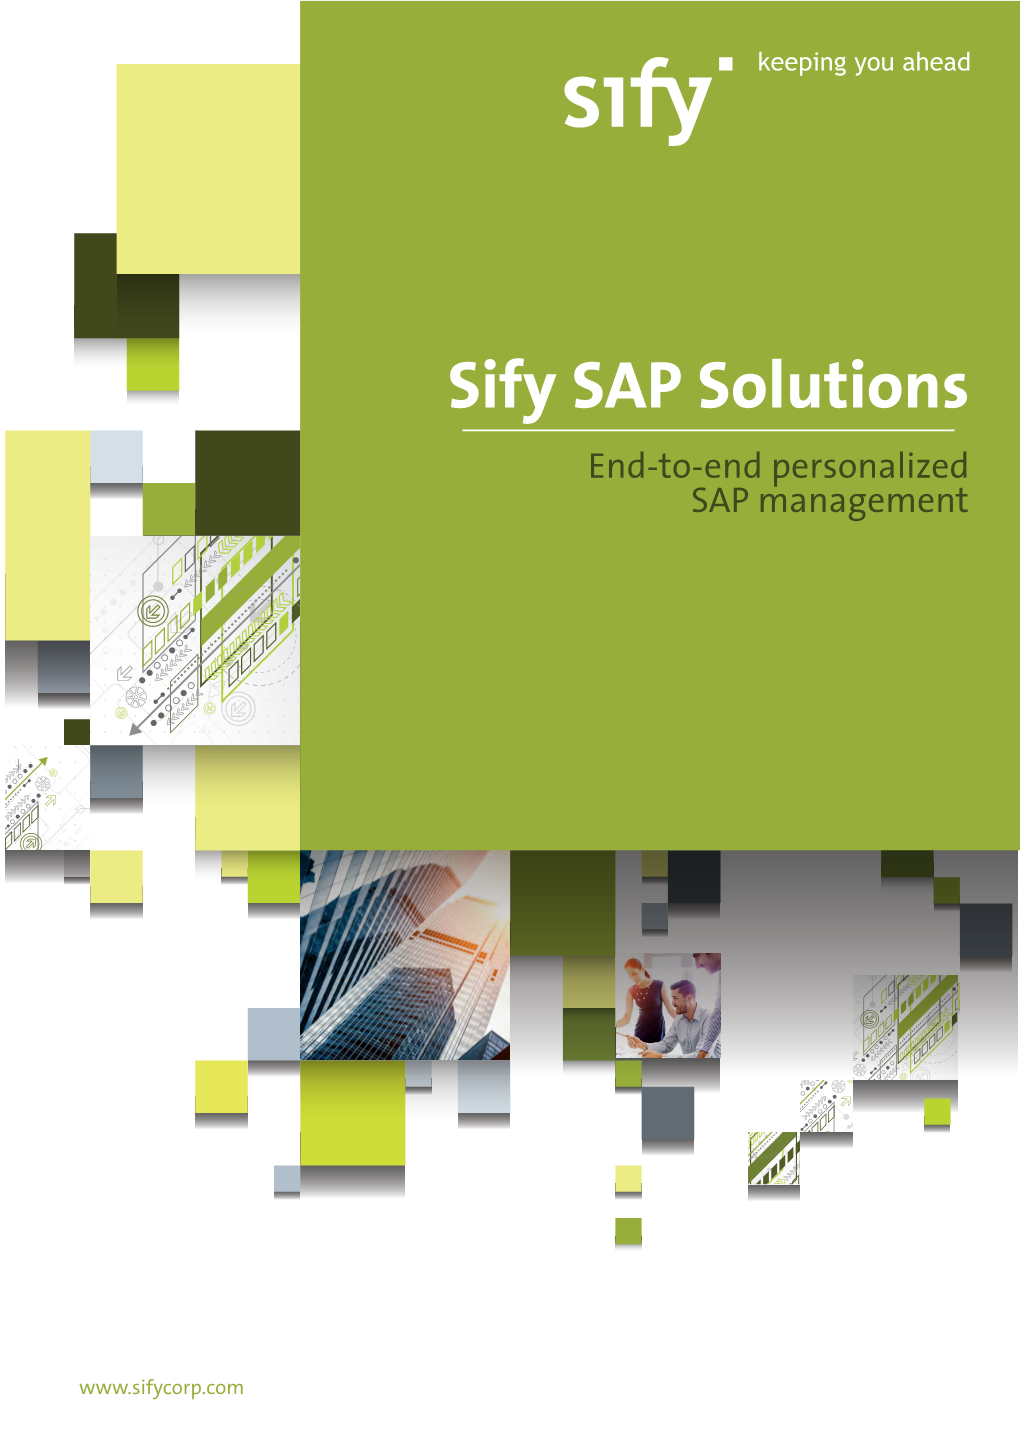 Sify SAP Solutions End-To-End Personalized SAP Management